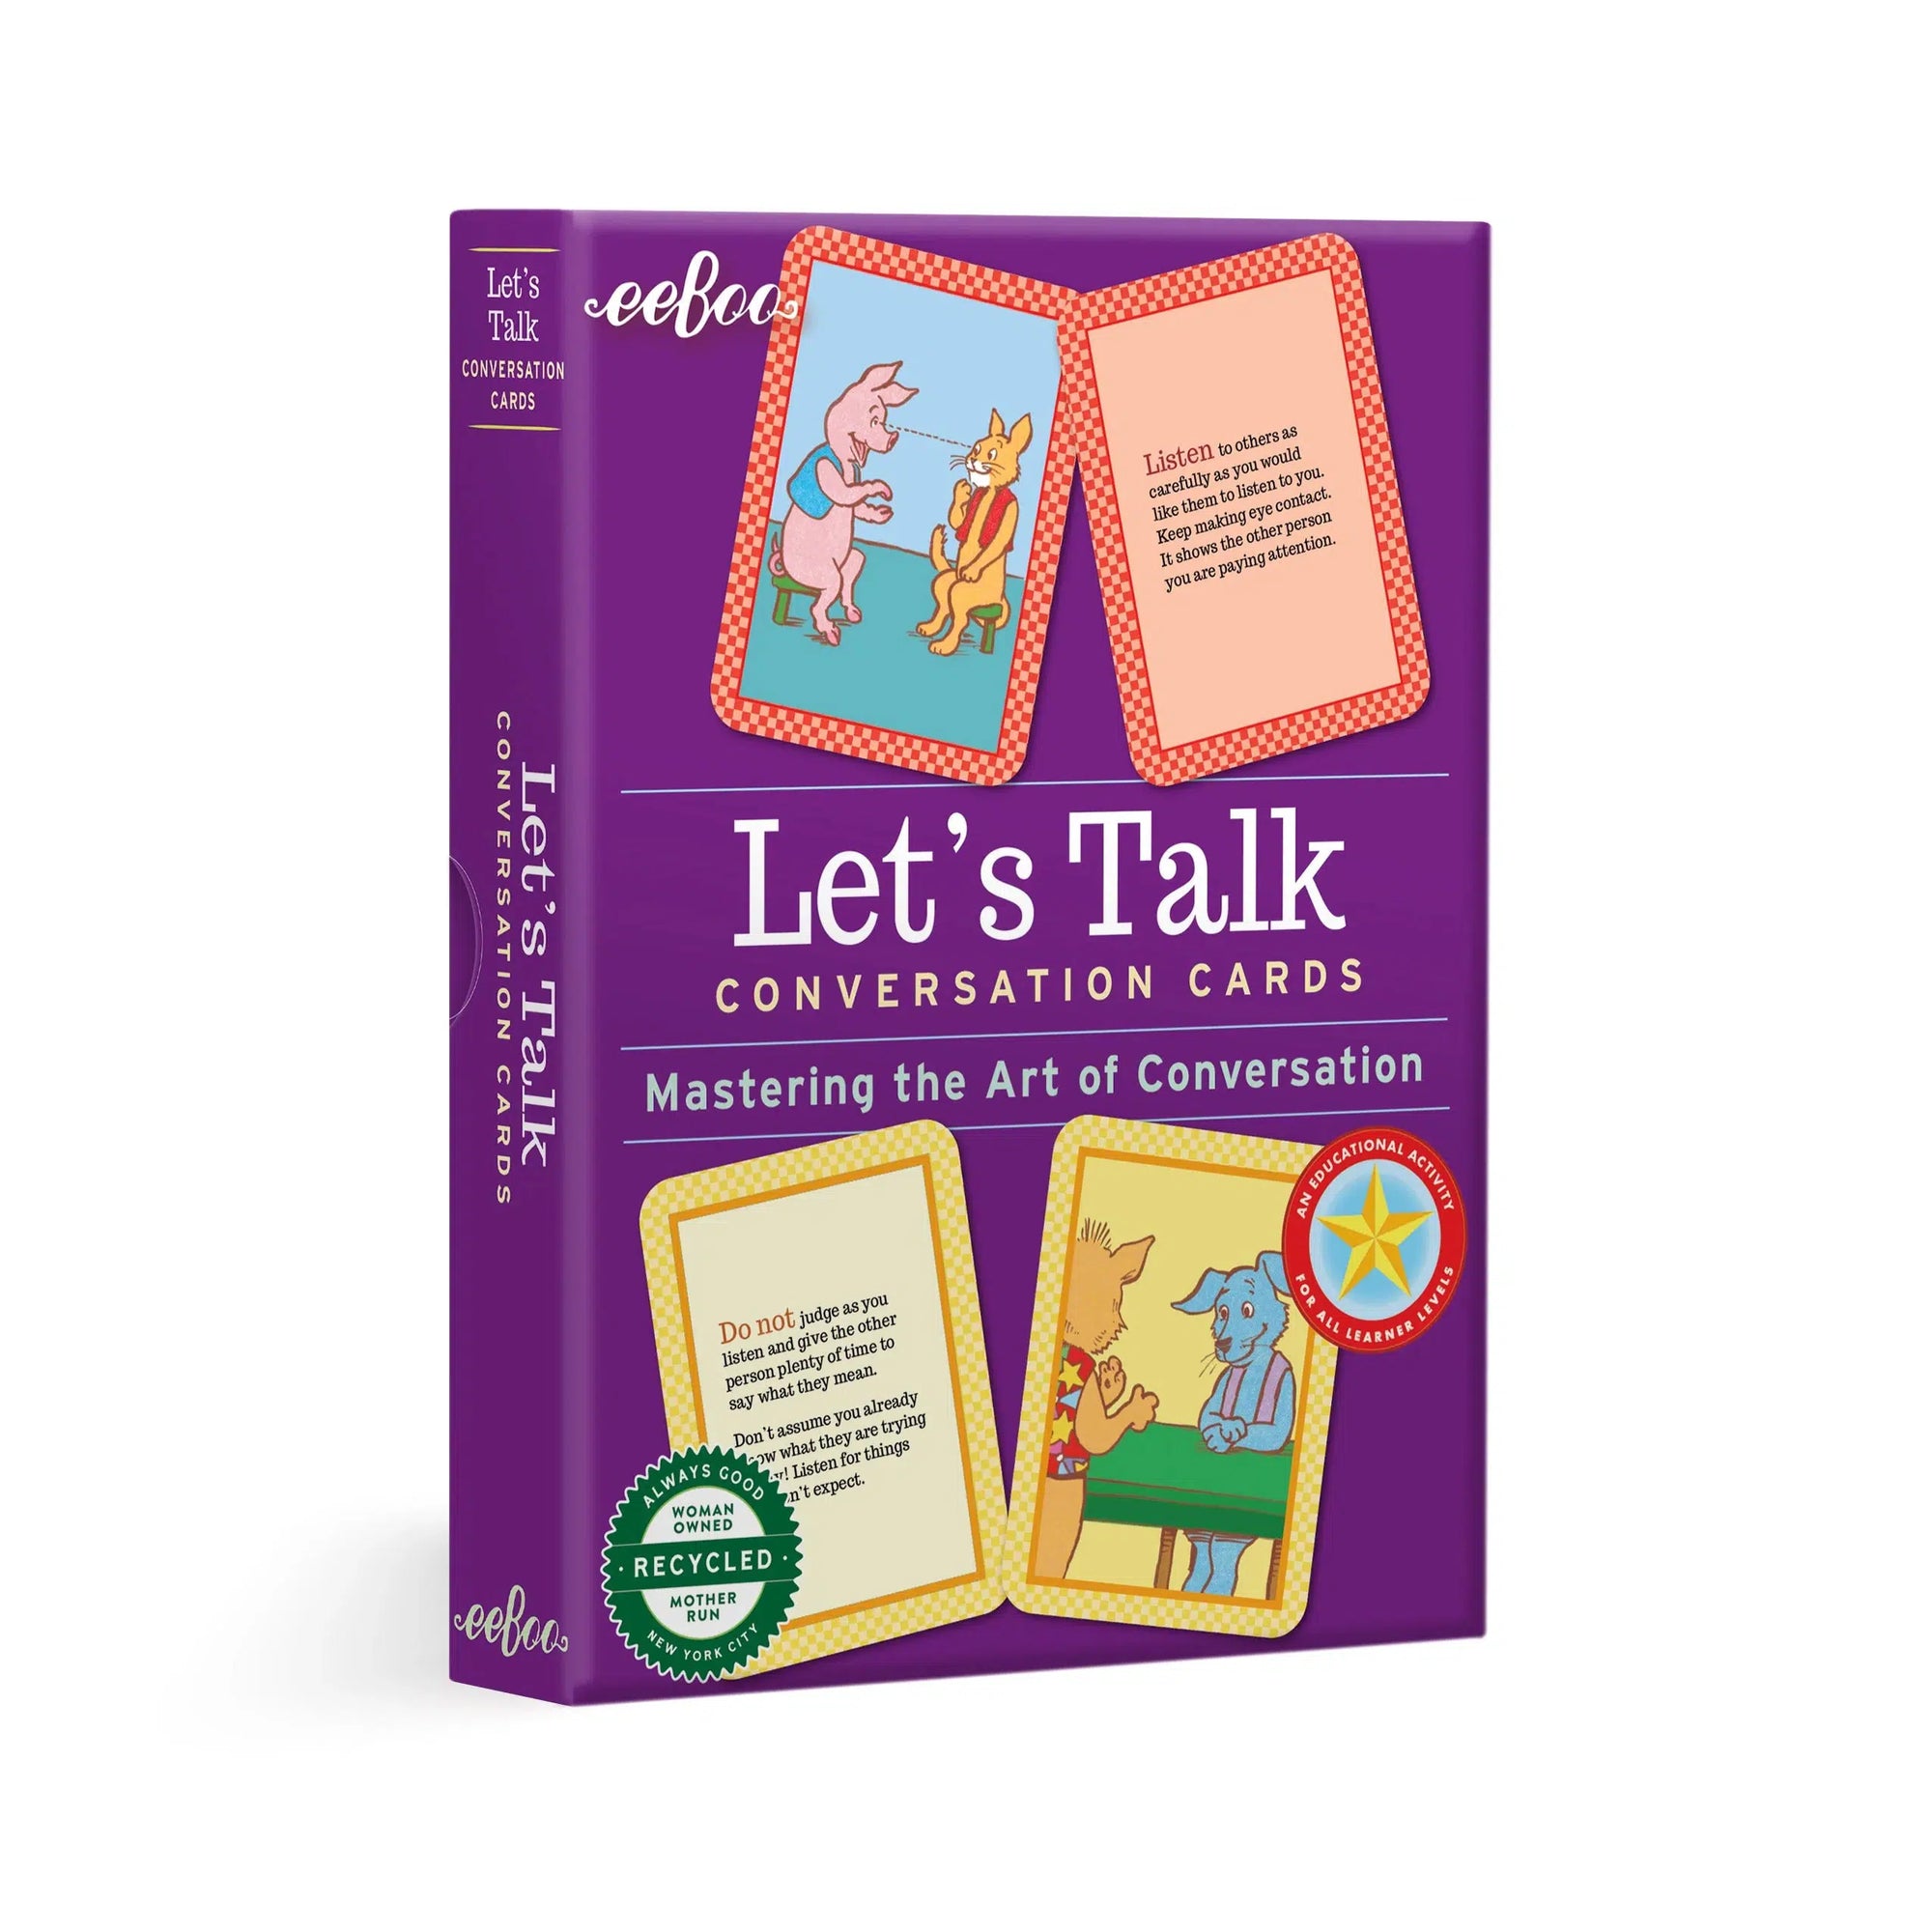 Front view of the Let's Talk Conversation Cards in their box.